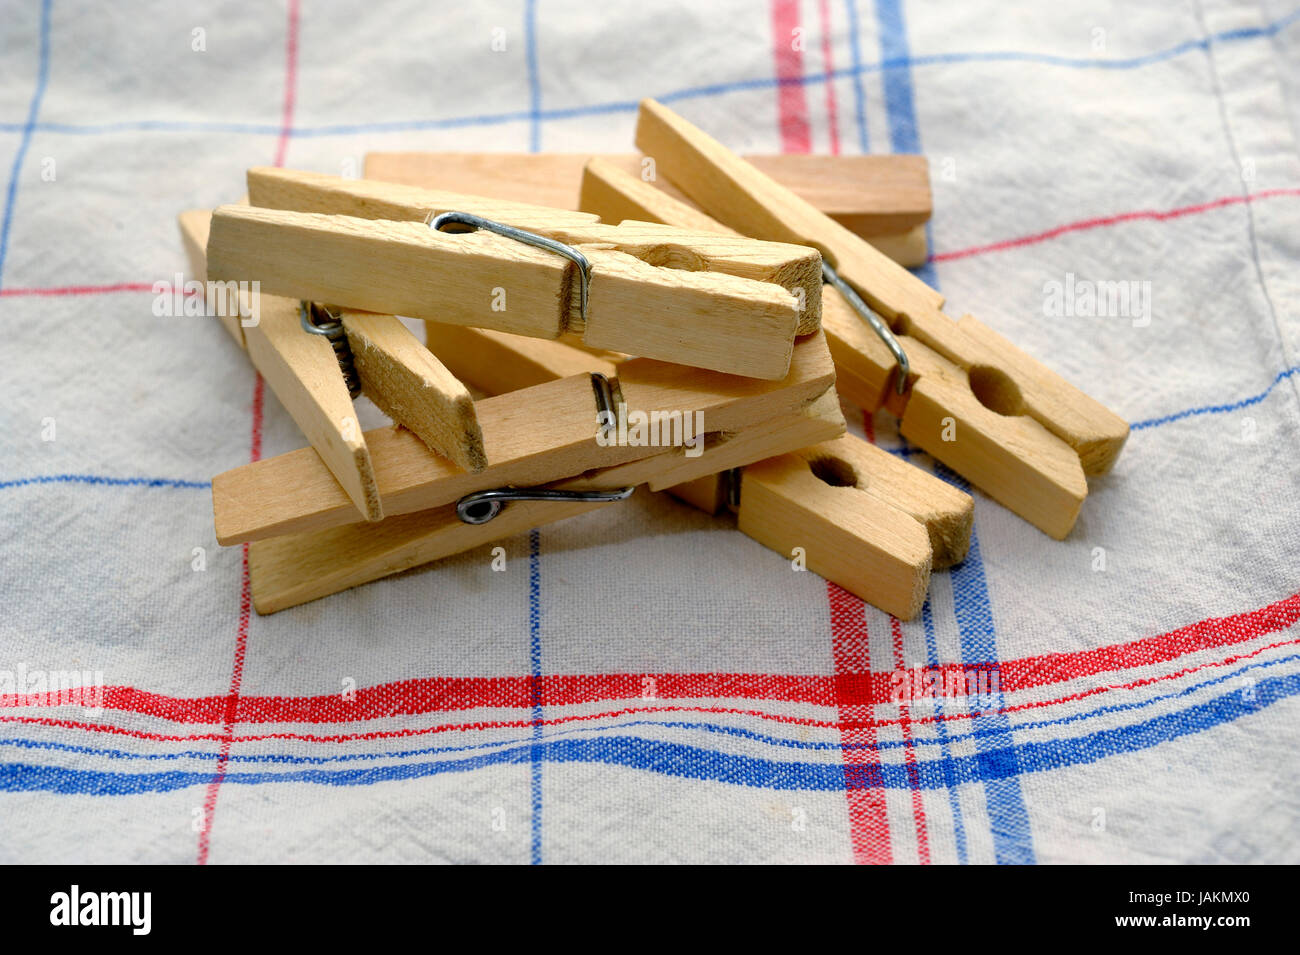 clothes pegs Stock Photo